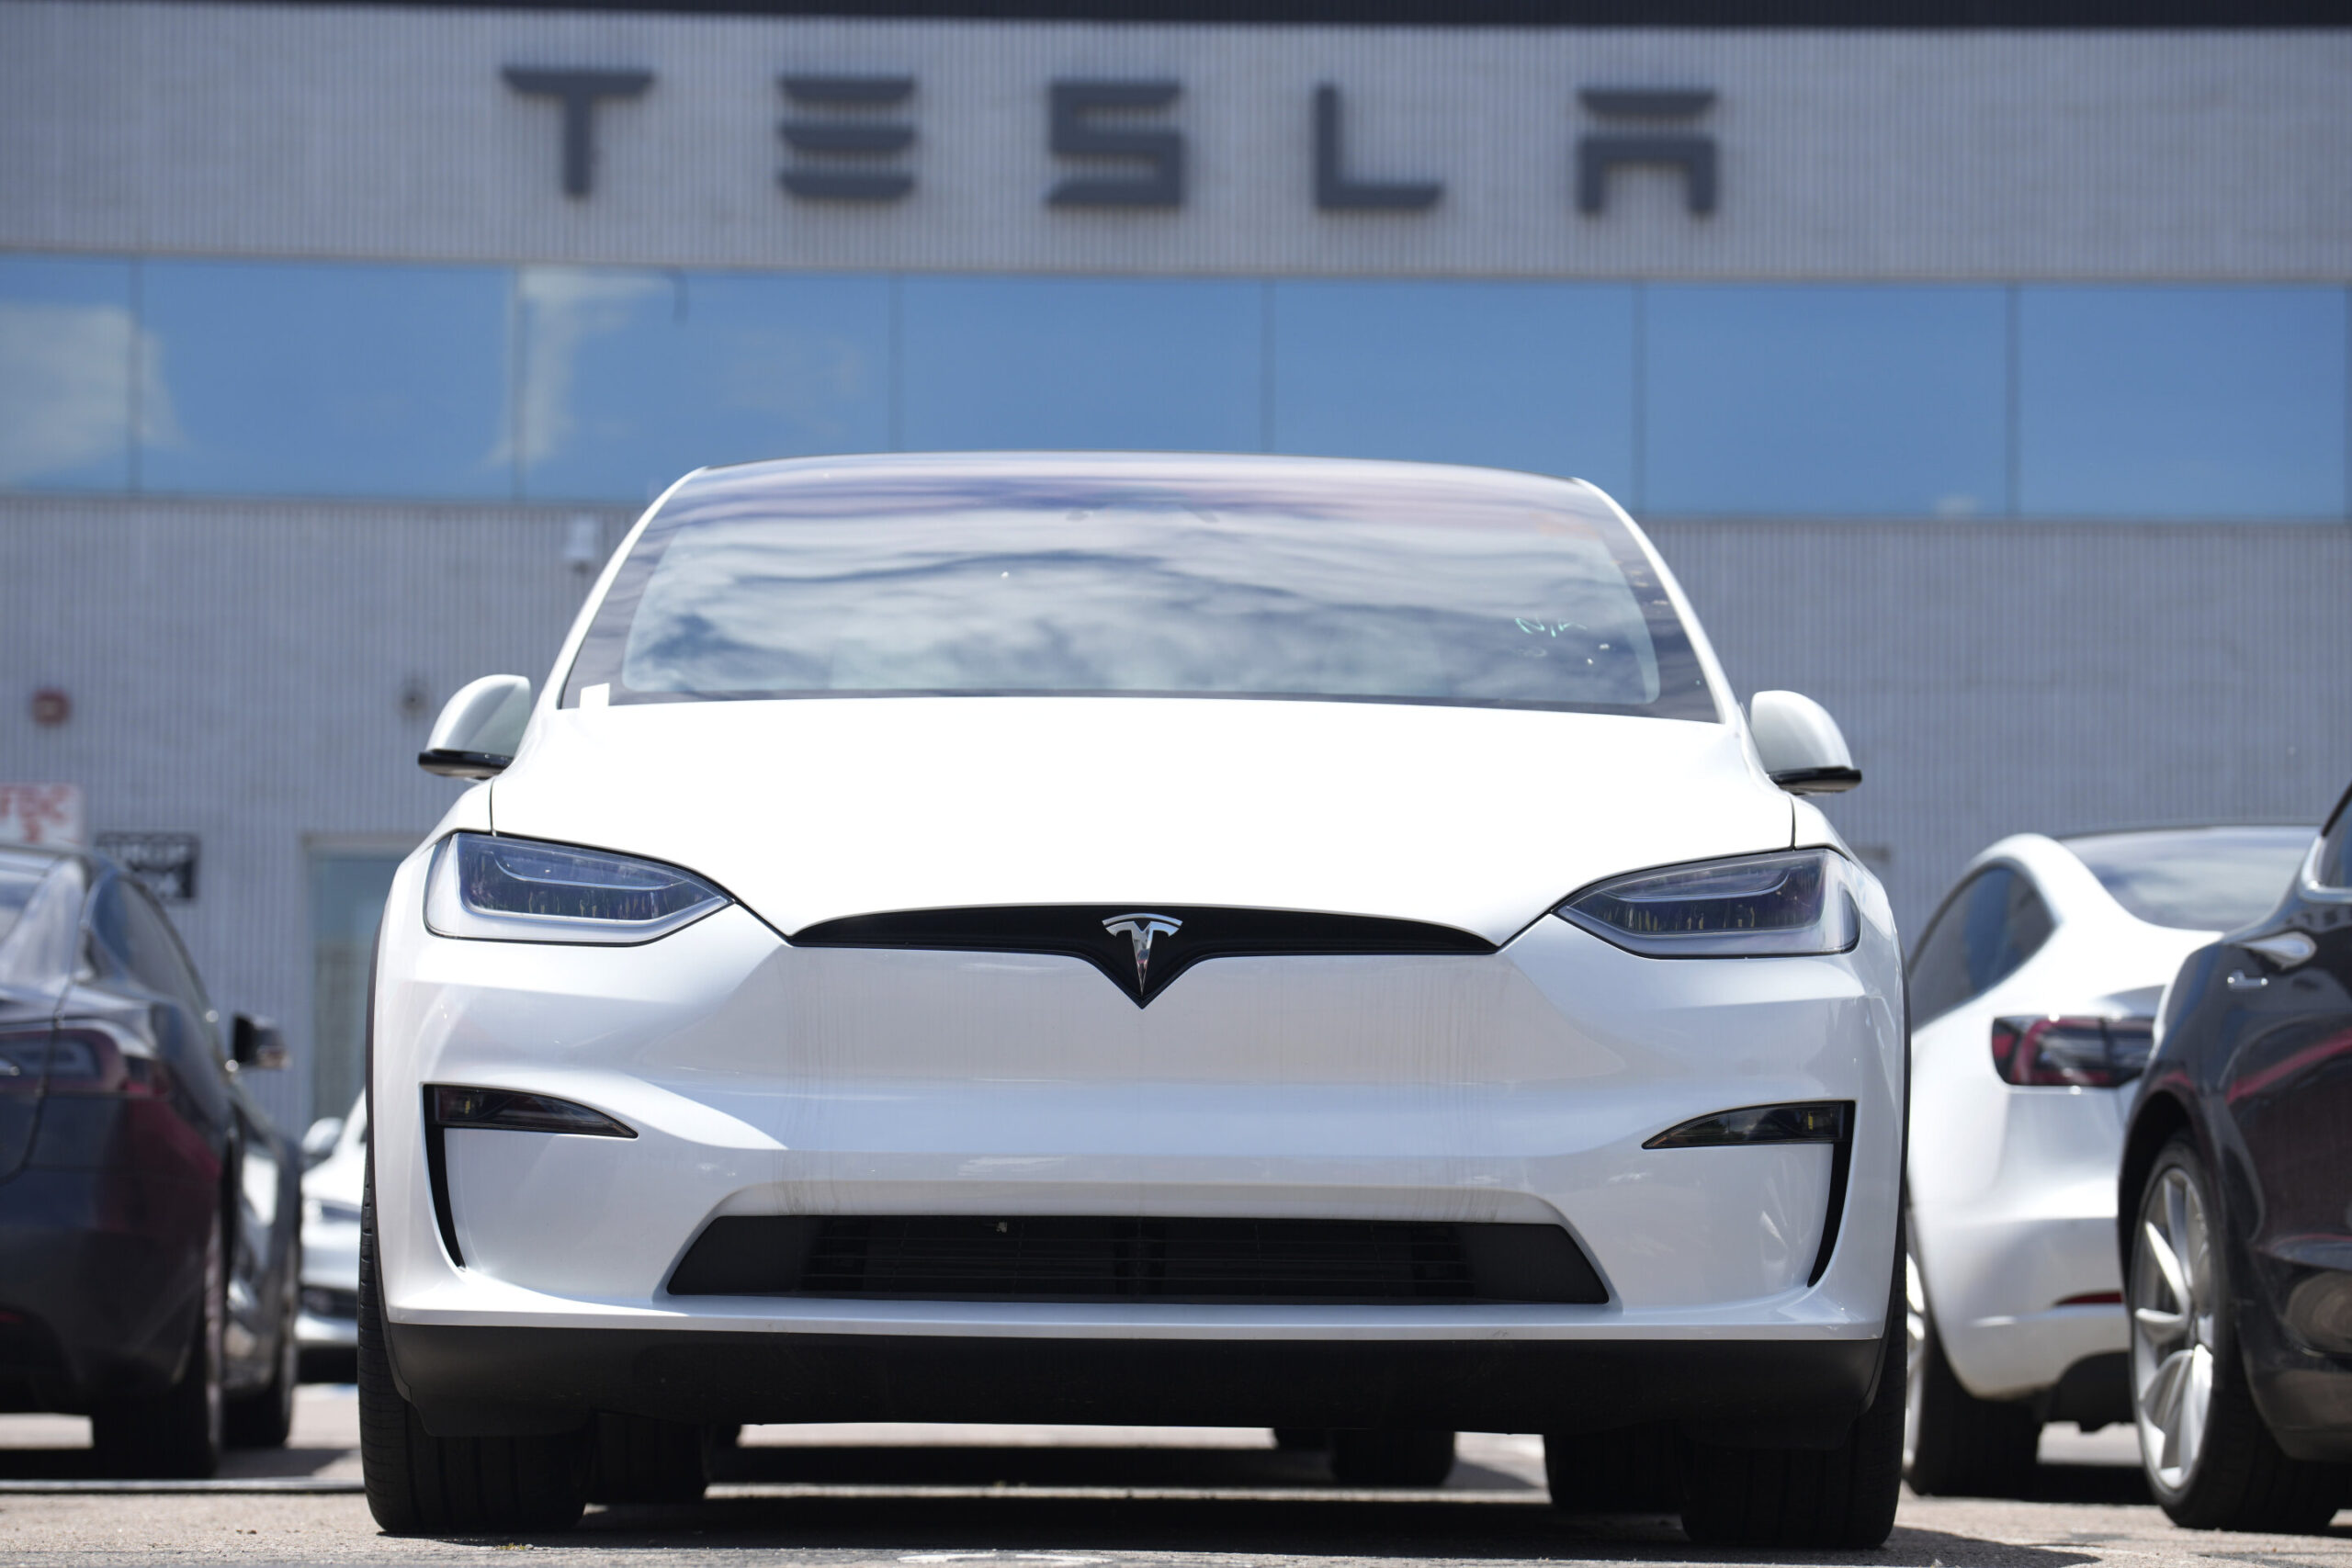 Tesla Reported 8.5% Lower Sales Than Last Year Despite Allowing Discount on It Best Selling Model